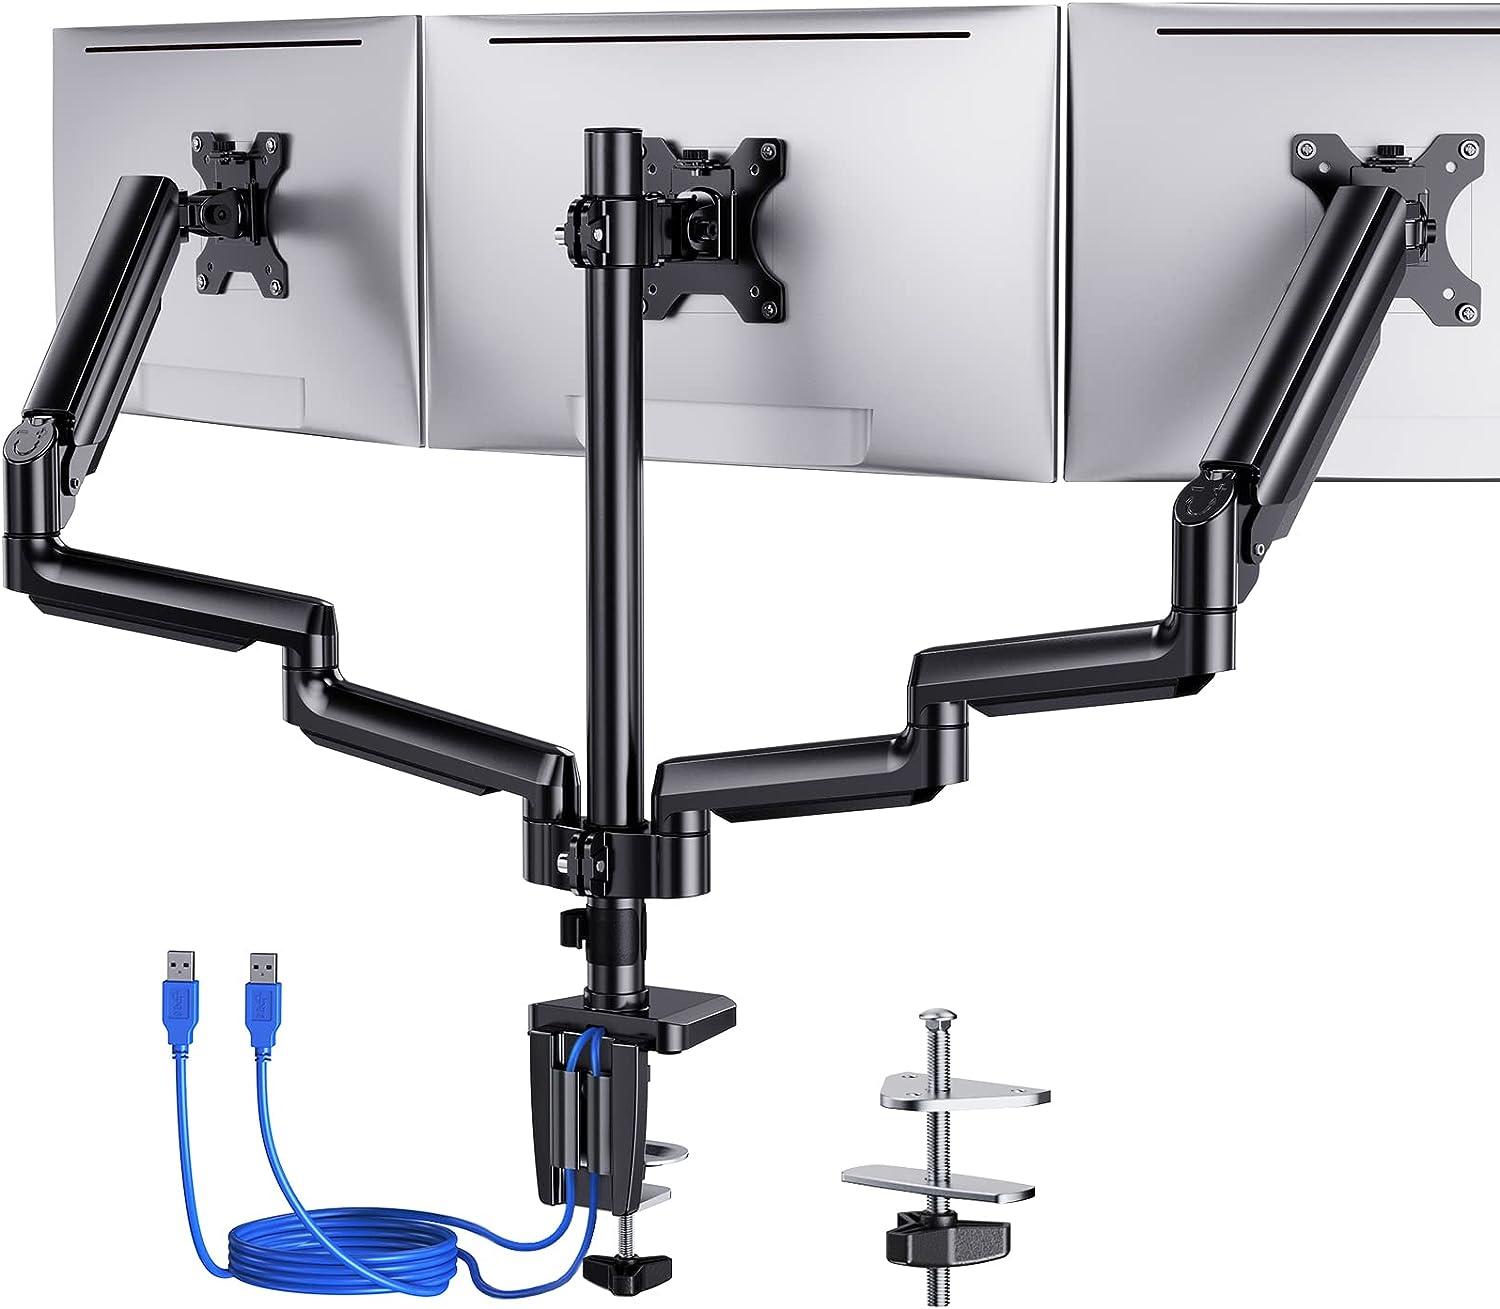 ErGear Dual-Gas Spring Arm Triple Monitor Stand Mount for $42.39 Shipped